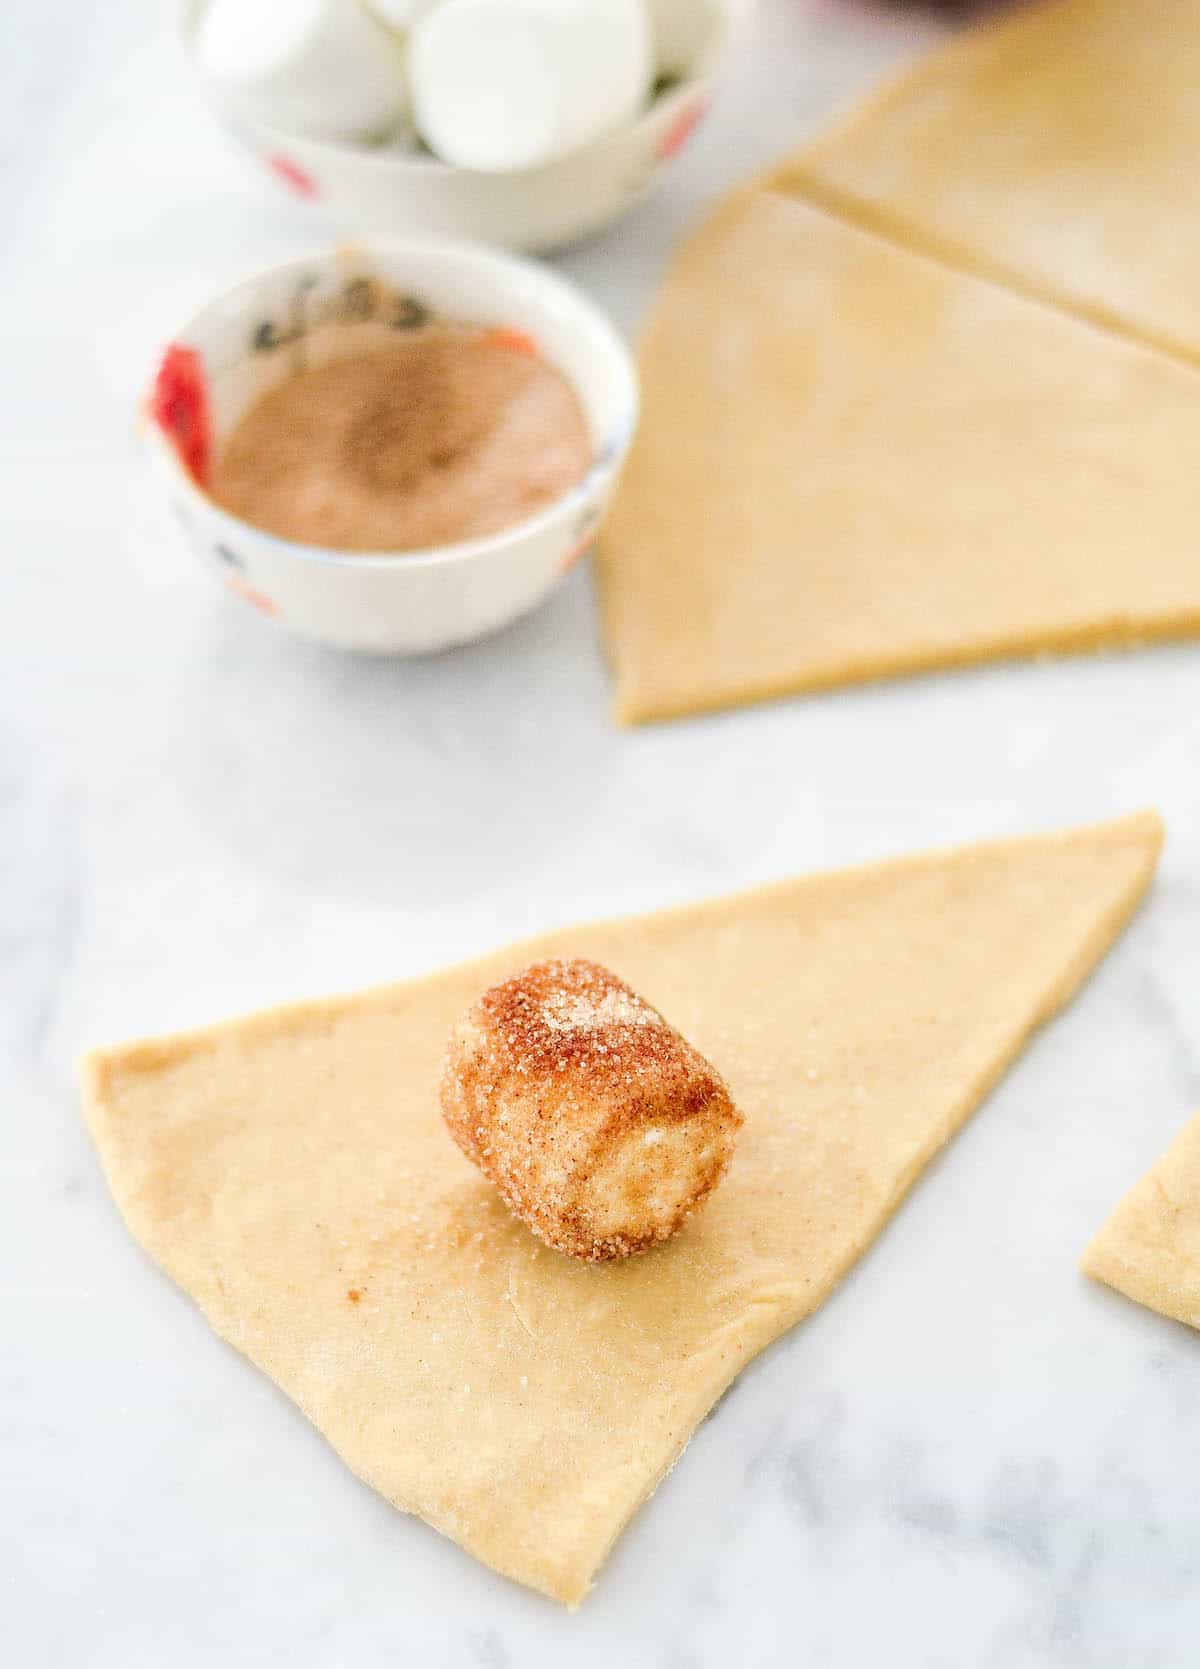 Side process shot of the homemade resurrection rolls showing a marshmallow that was dipped in butter and coated with cinnamon sugar on a triangular piece of dough ready to be rolled. 